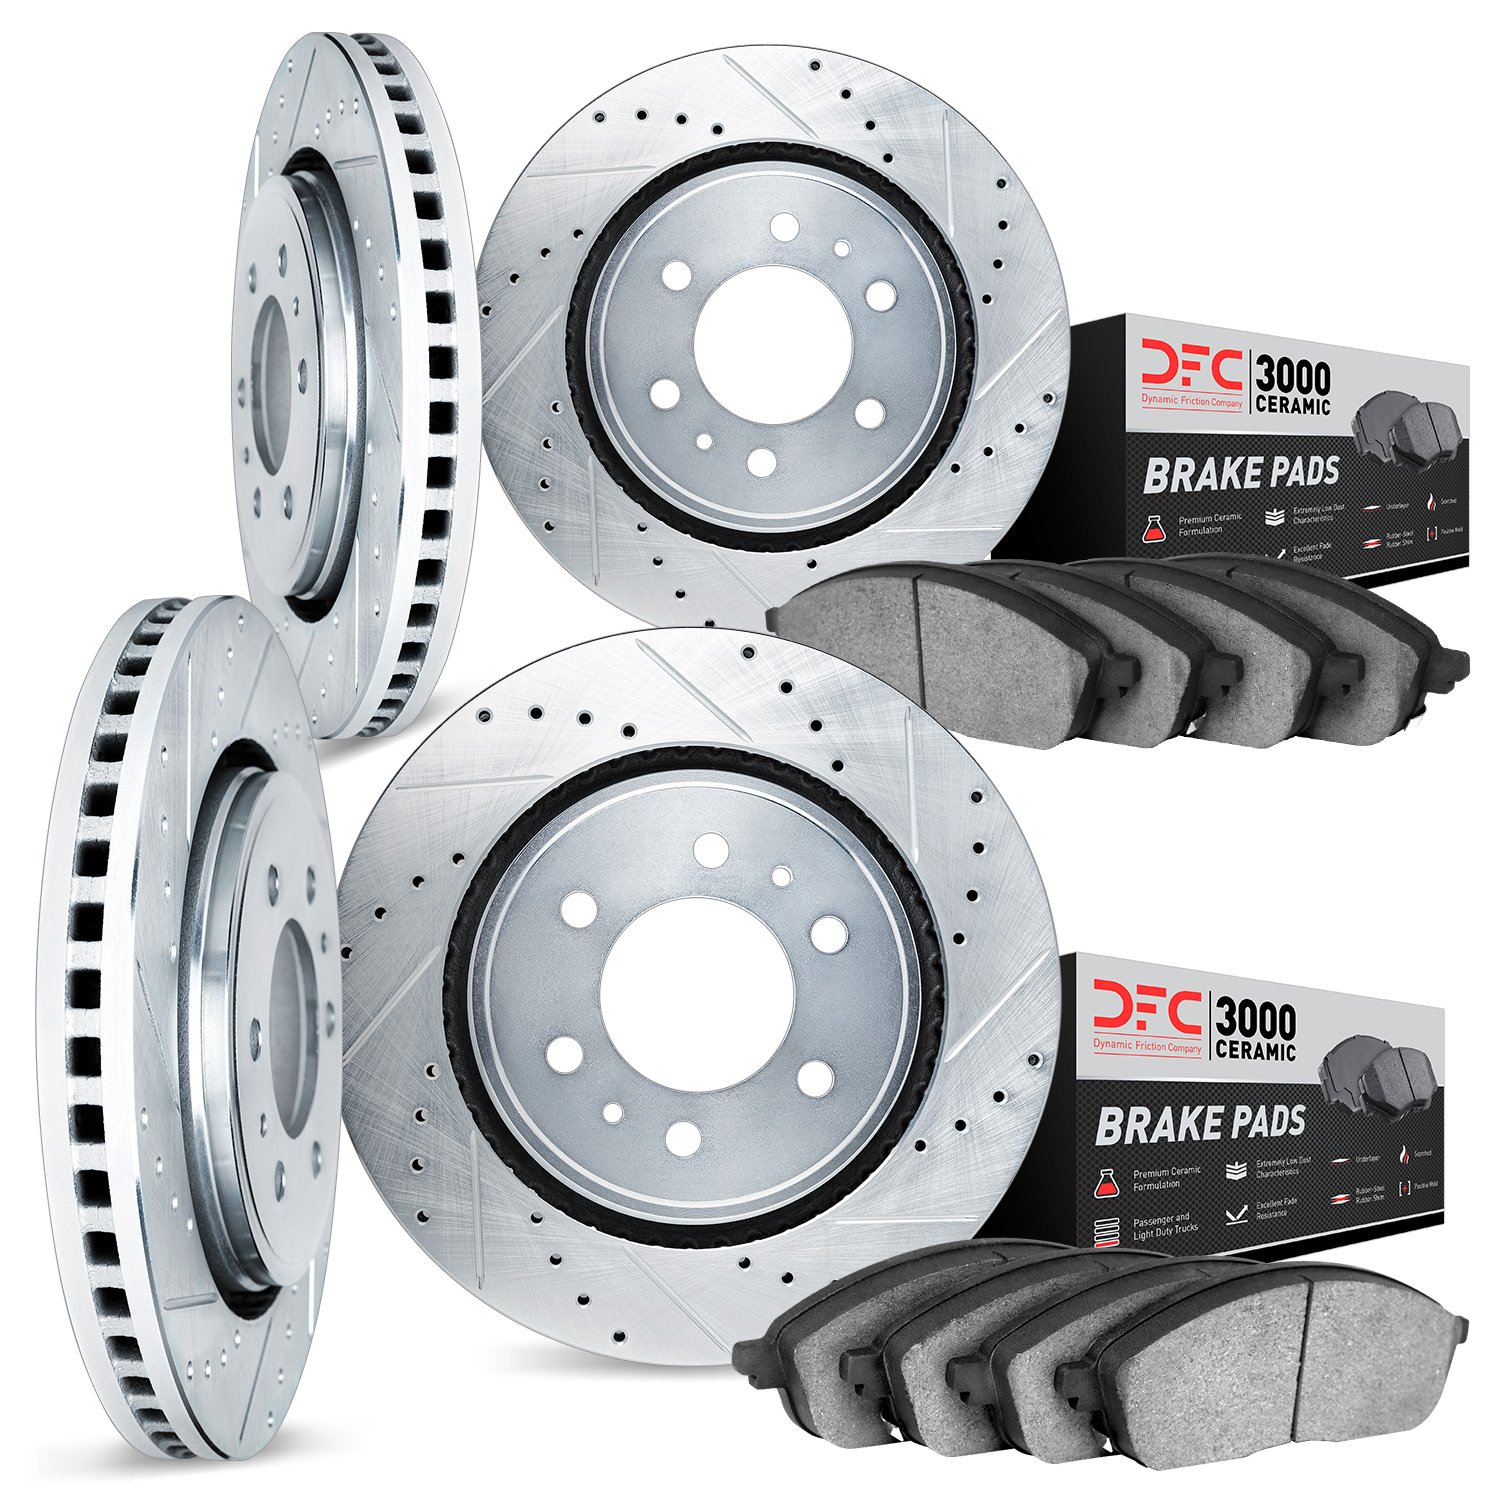 7304-54122 Drilled/Slotted Brake Rotor with 3000-Series Ceramic Brake Pads Kit [Silver], 2012-2020 Ford/Lincoln/Mercury/Mazda, P